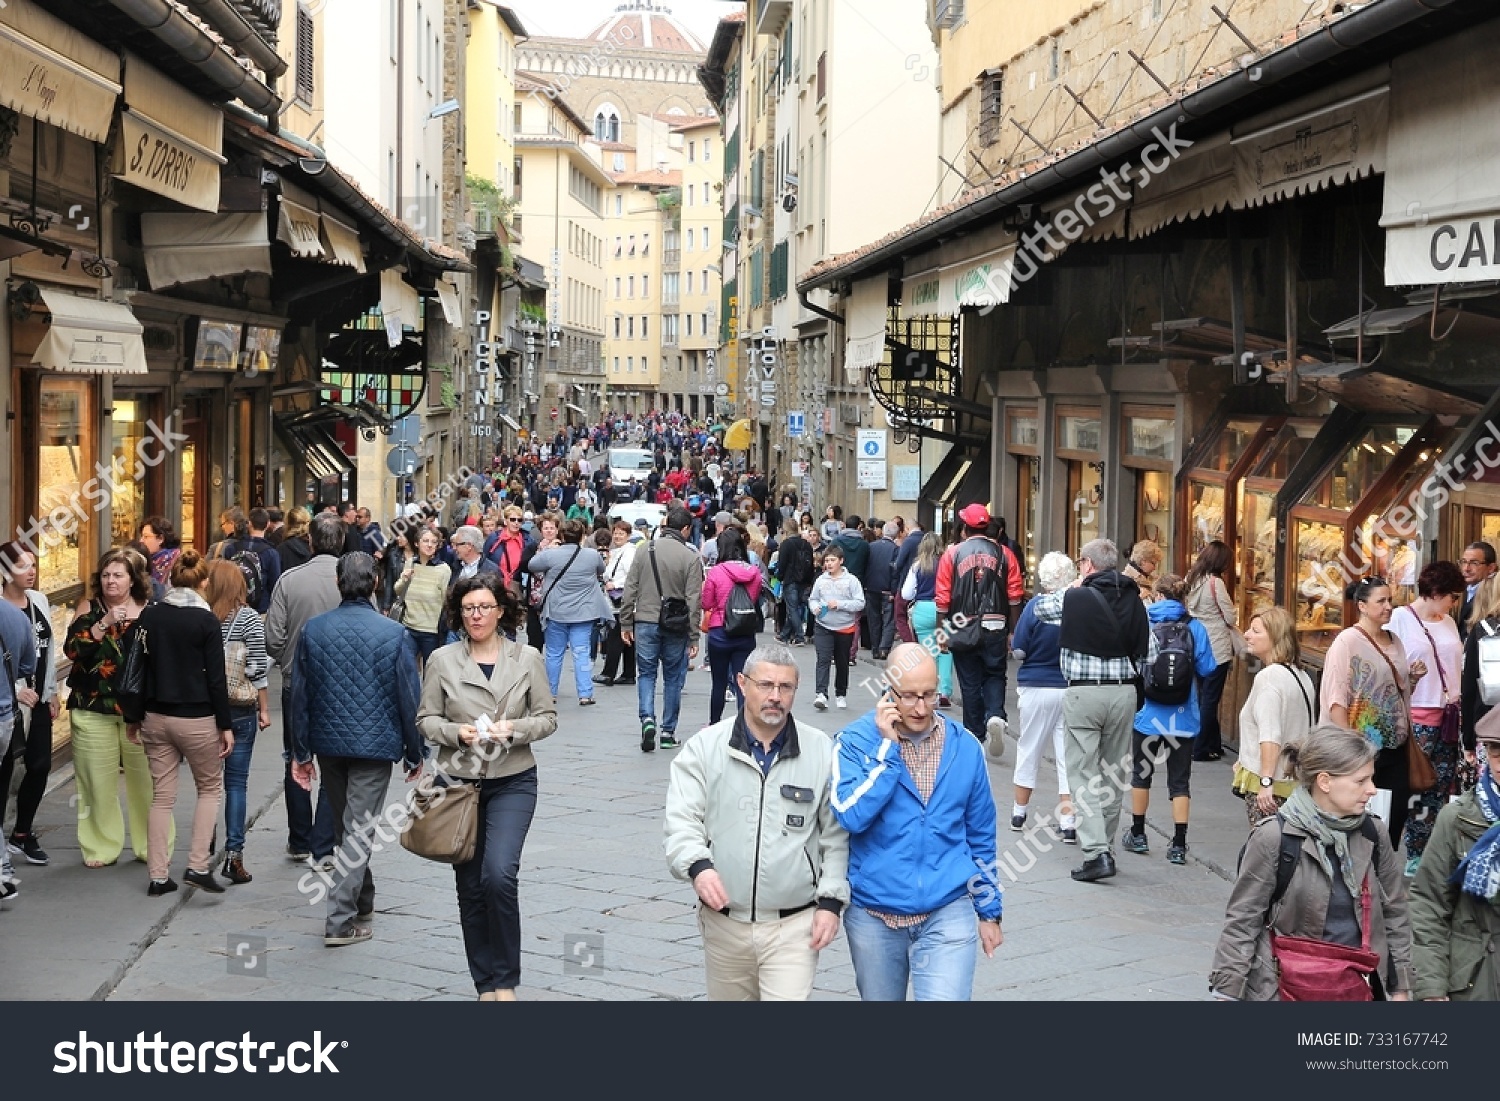 Florence Italy April 30 2015 Crowd Stock Photo Edit Now 733167742